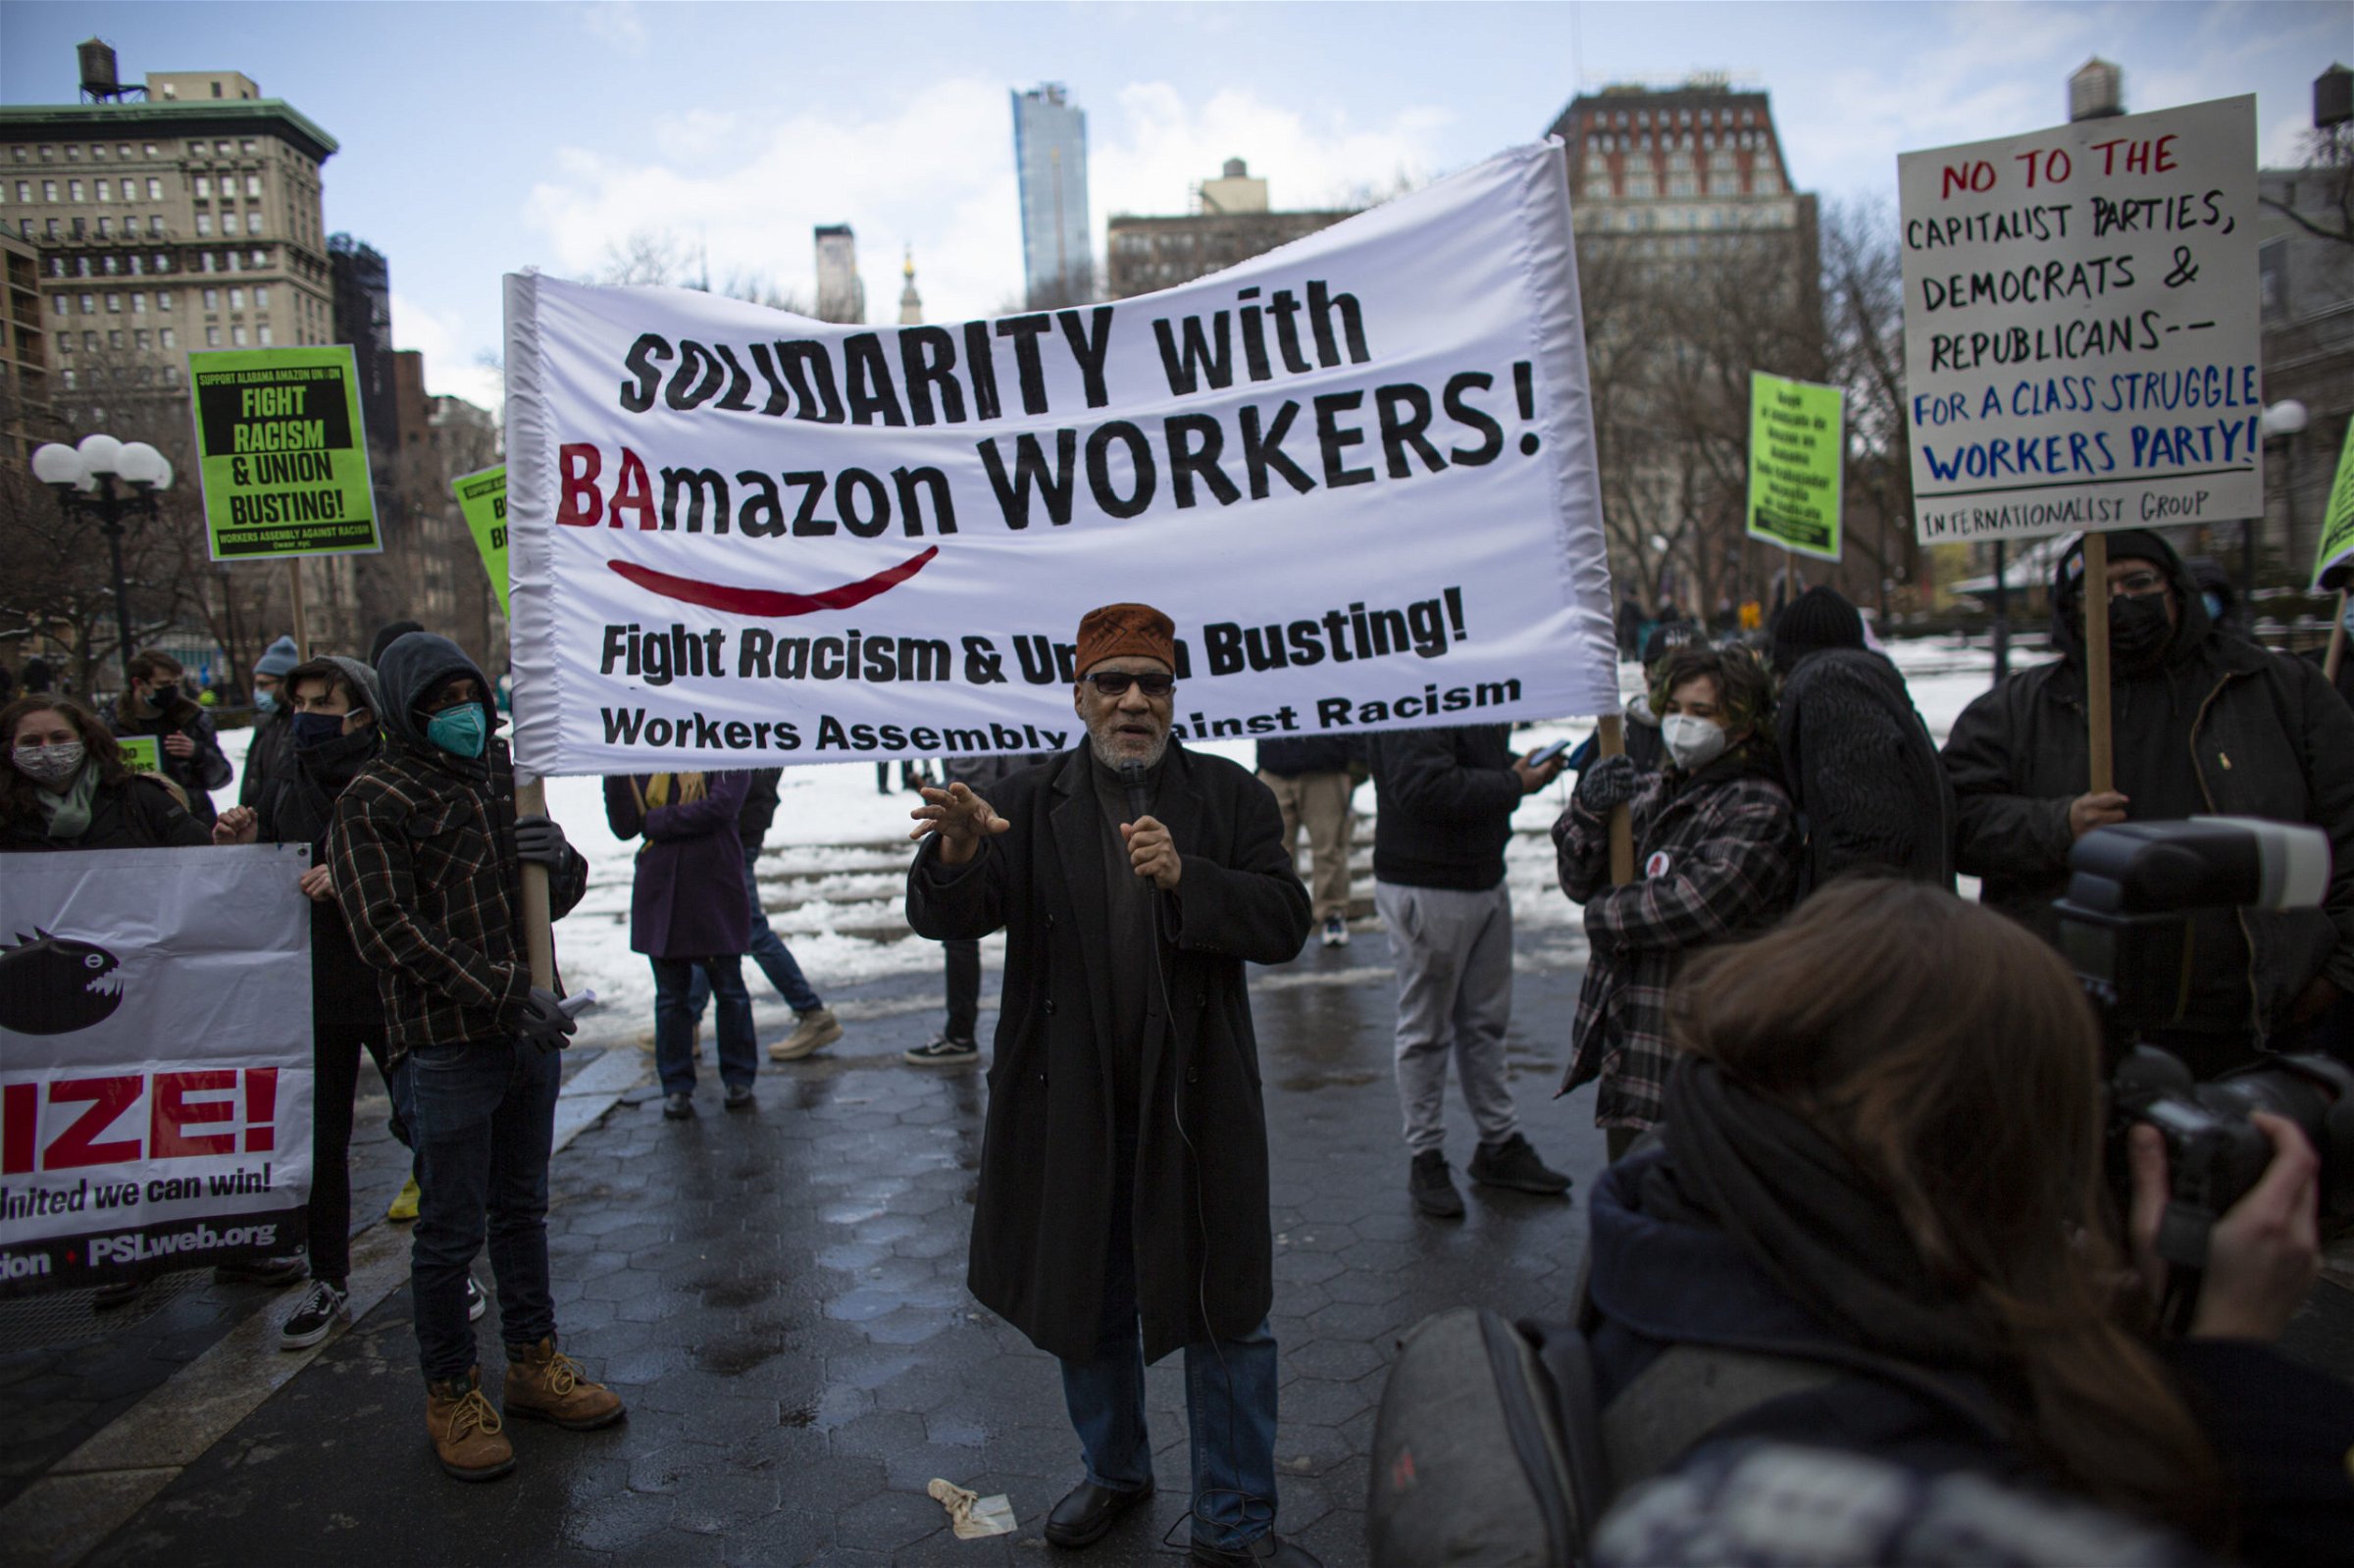 People gather during a protest in support of Amazon workers in Union Square, New York on Feb. 20. (Kena Betancur/AFP via Getty Images)